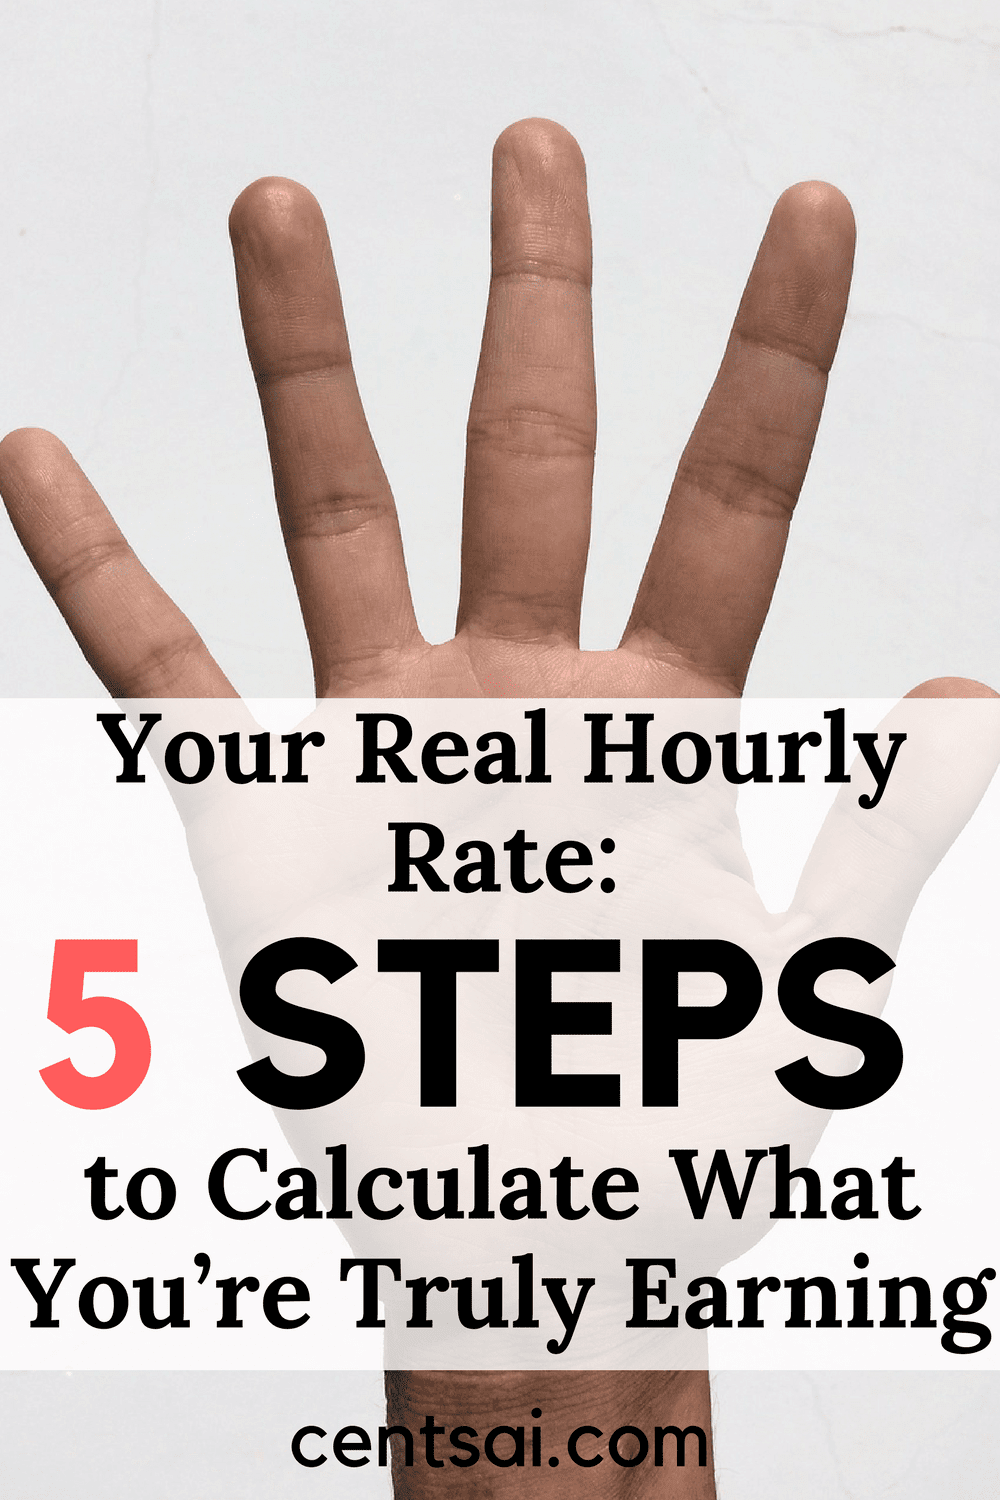 Your Real Hourly Rate 5 Steps to Calculate What You’re Truly Earning